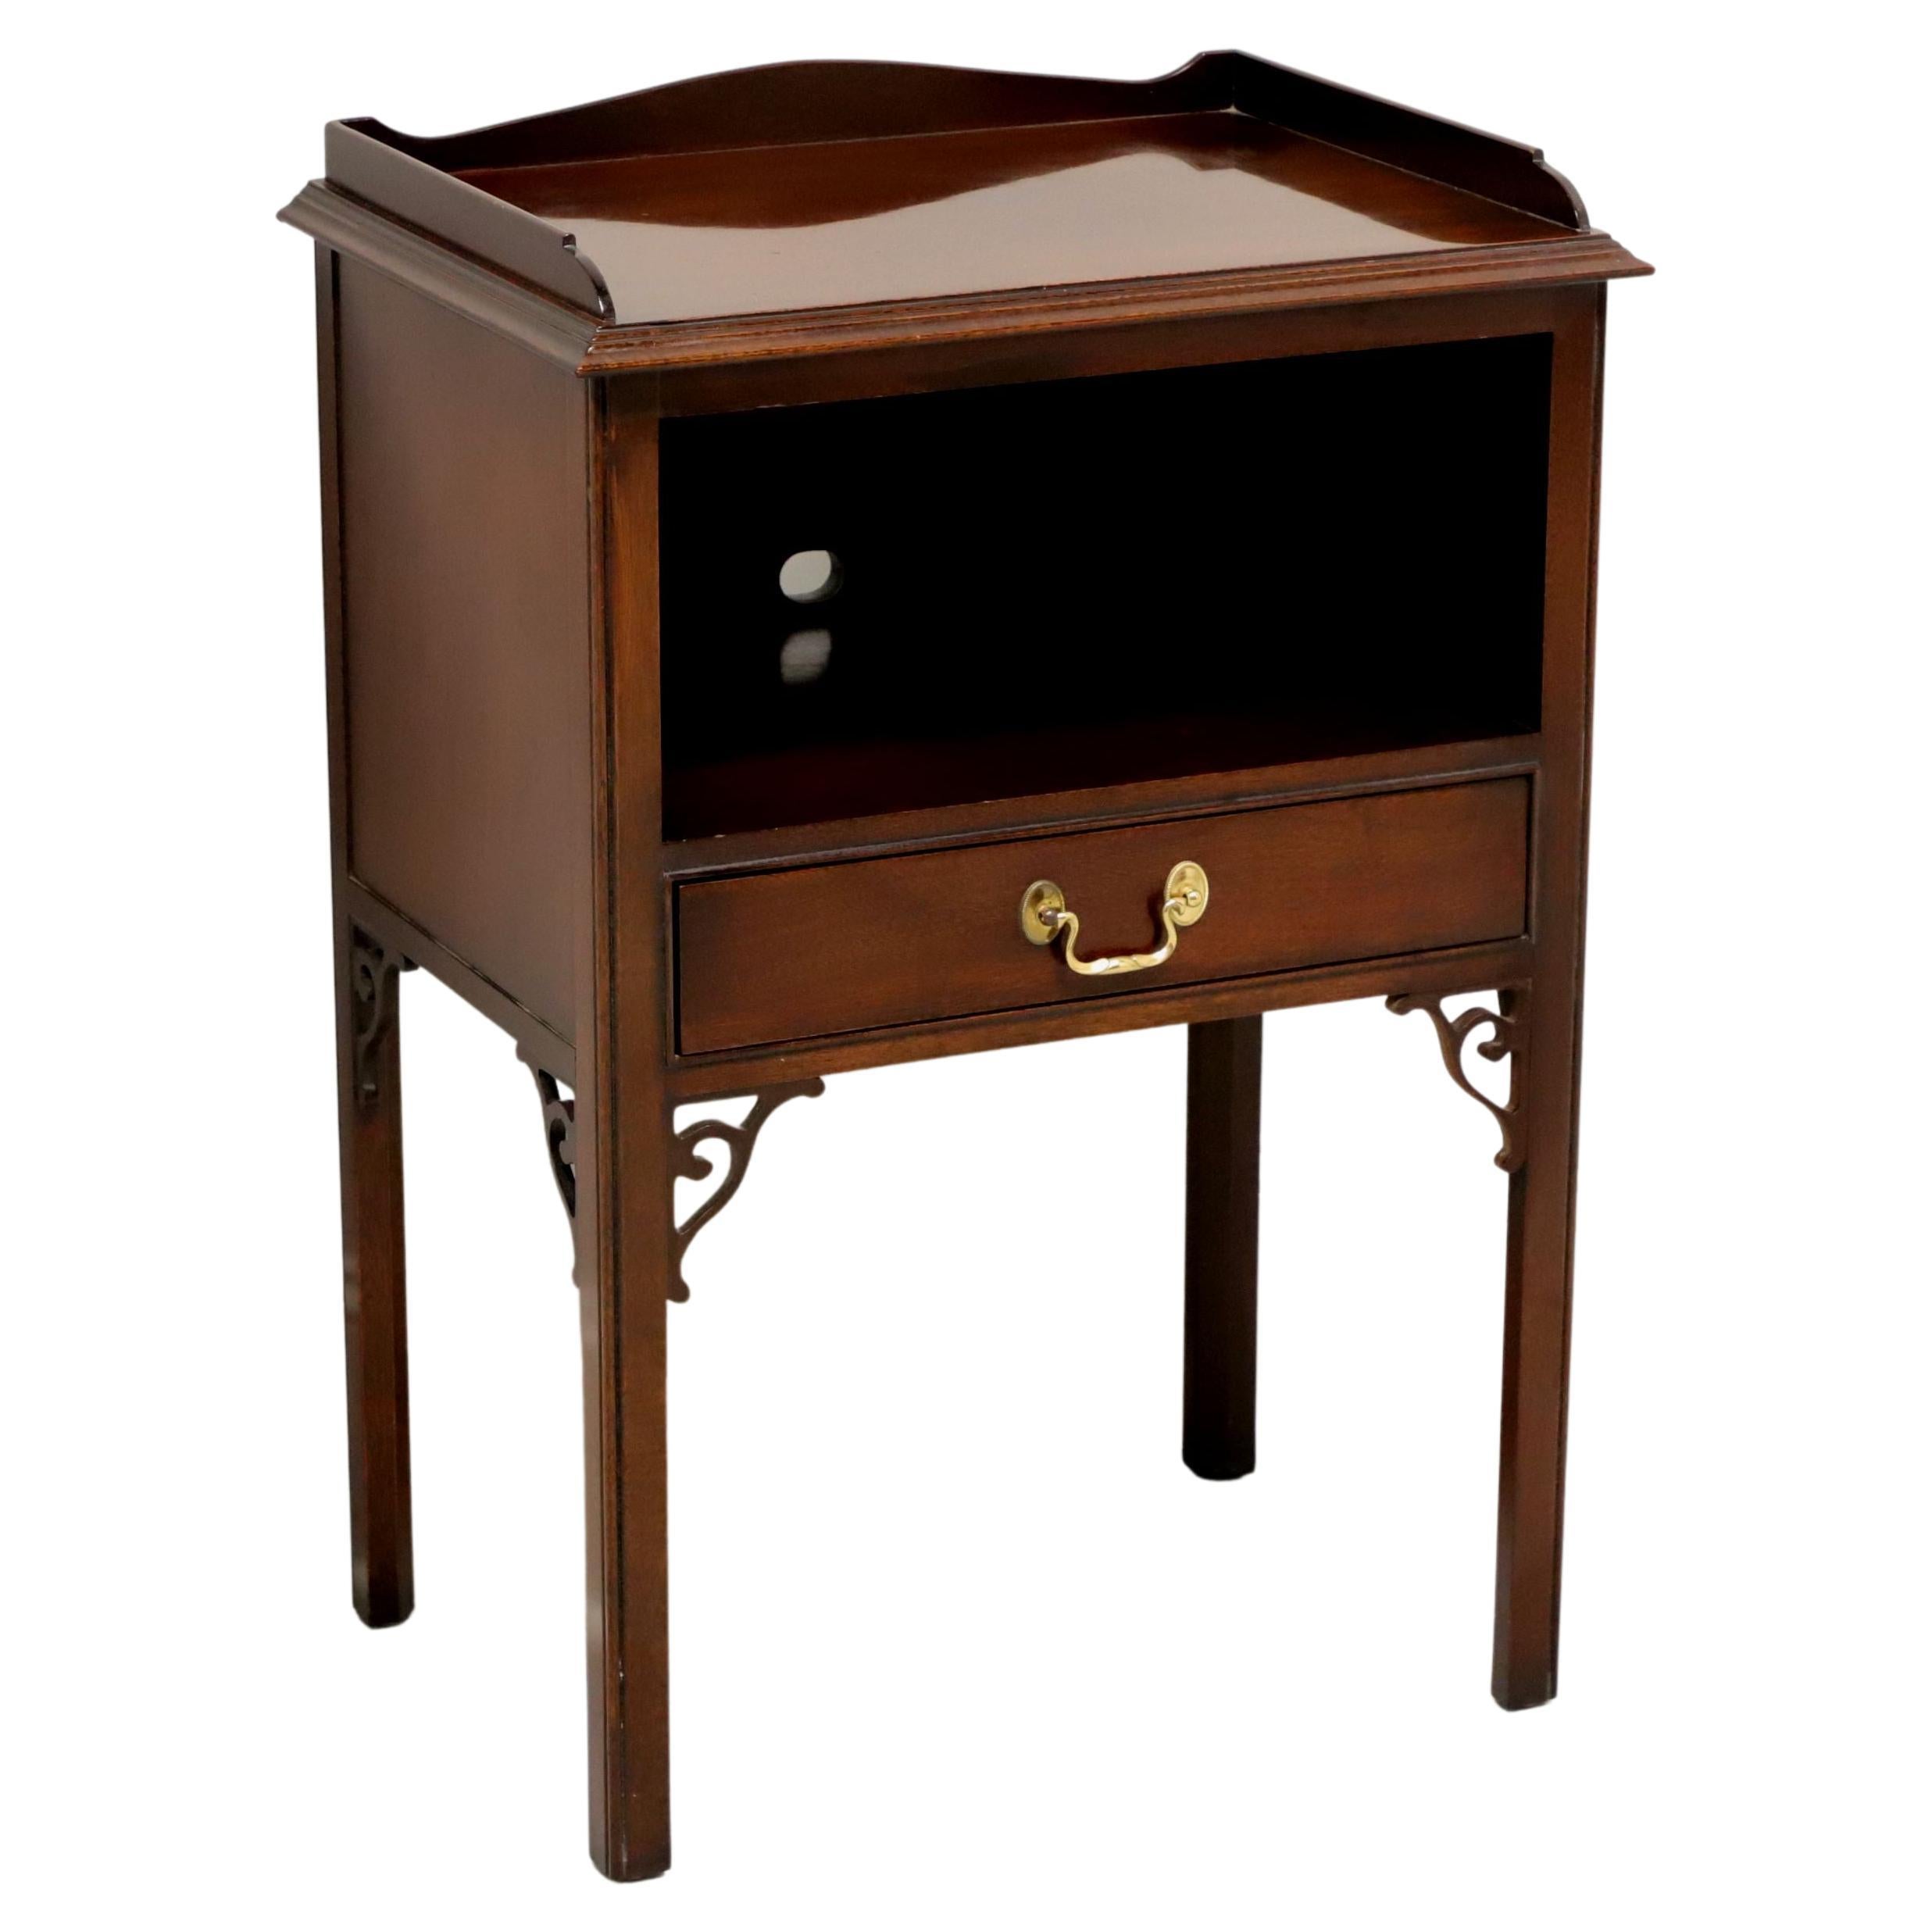 COUNCILL CRAFTSMEN Mahogany Chippendale Style Nightstand - A